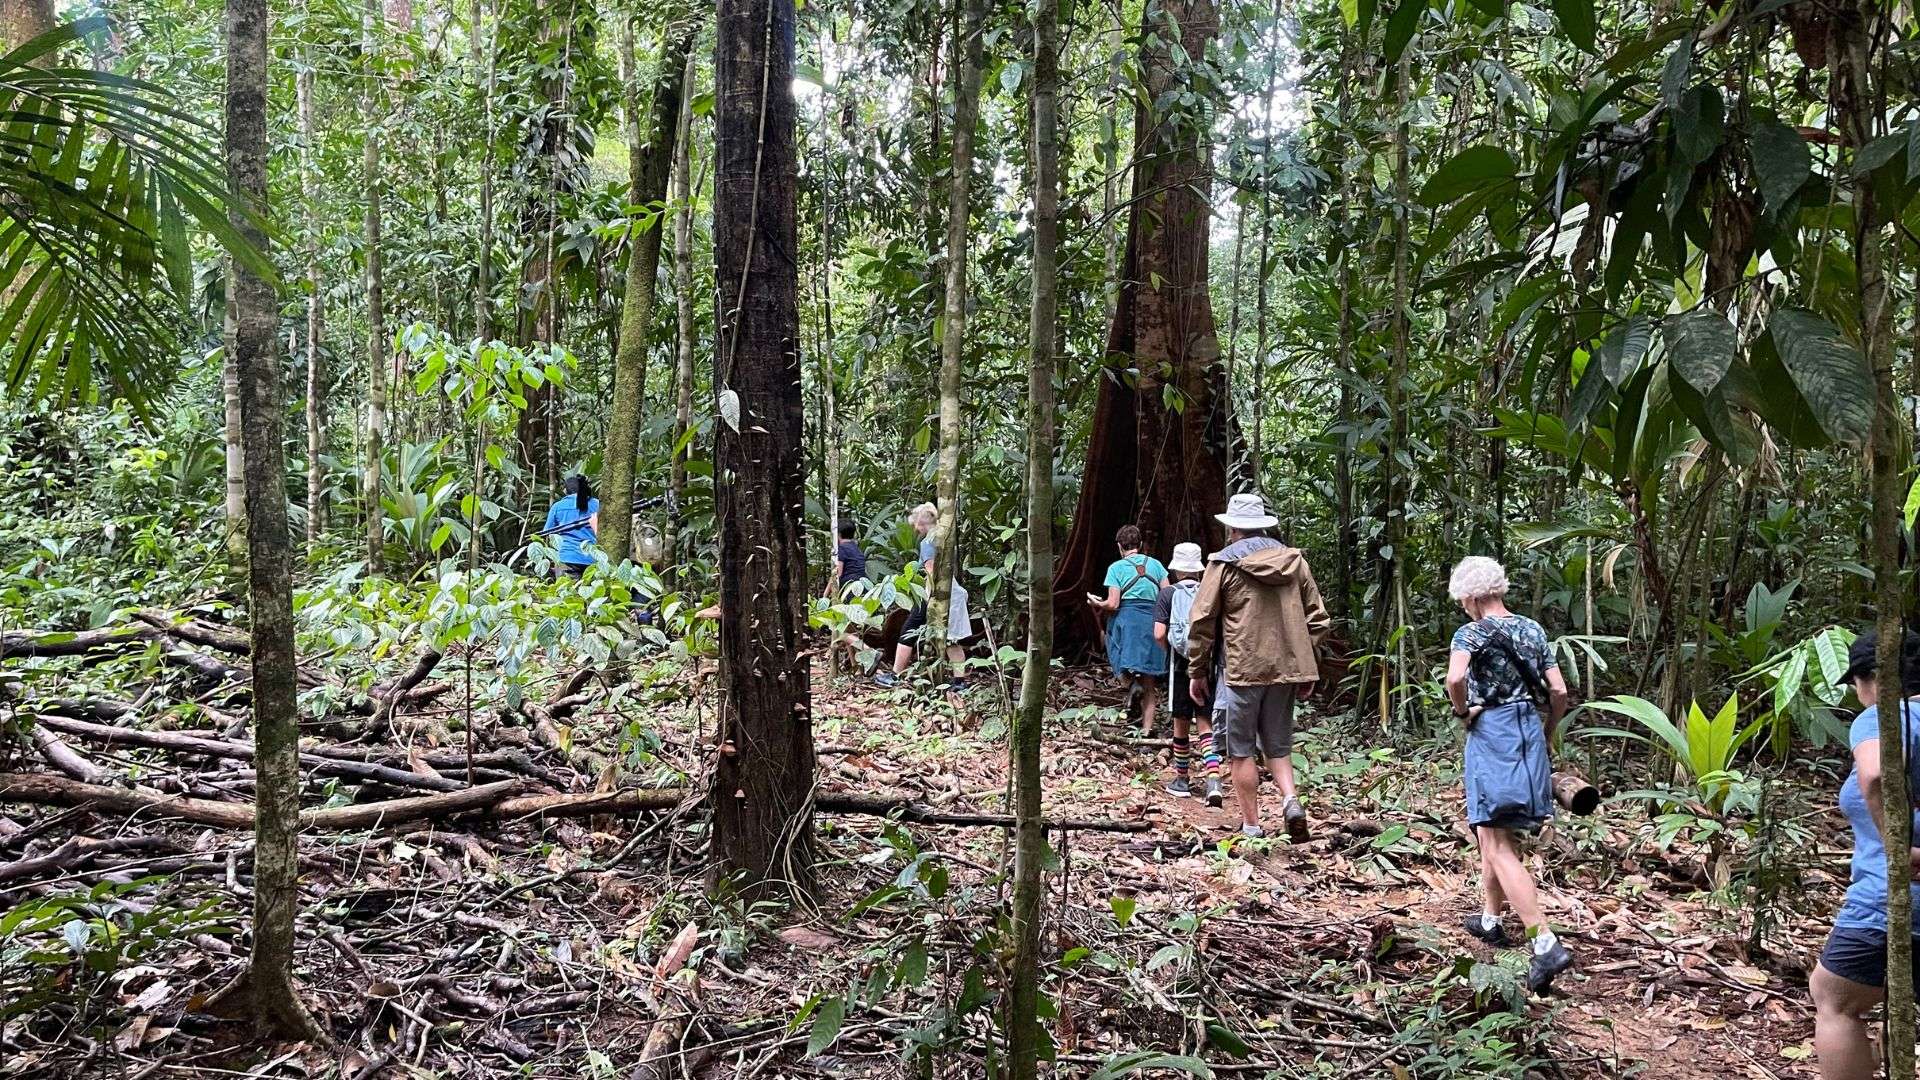 Travelers walking in the Costa Rican forest